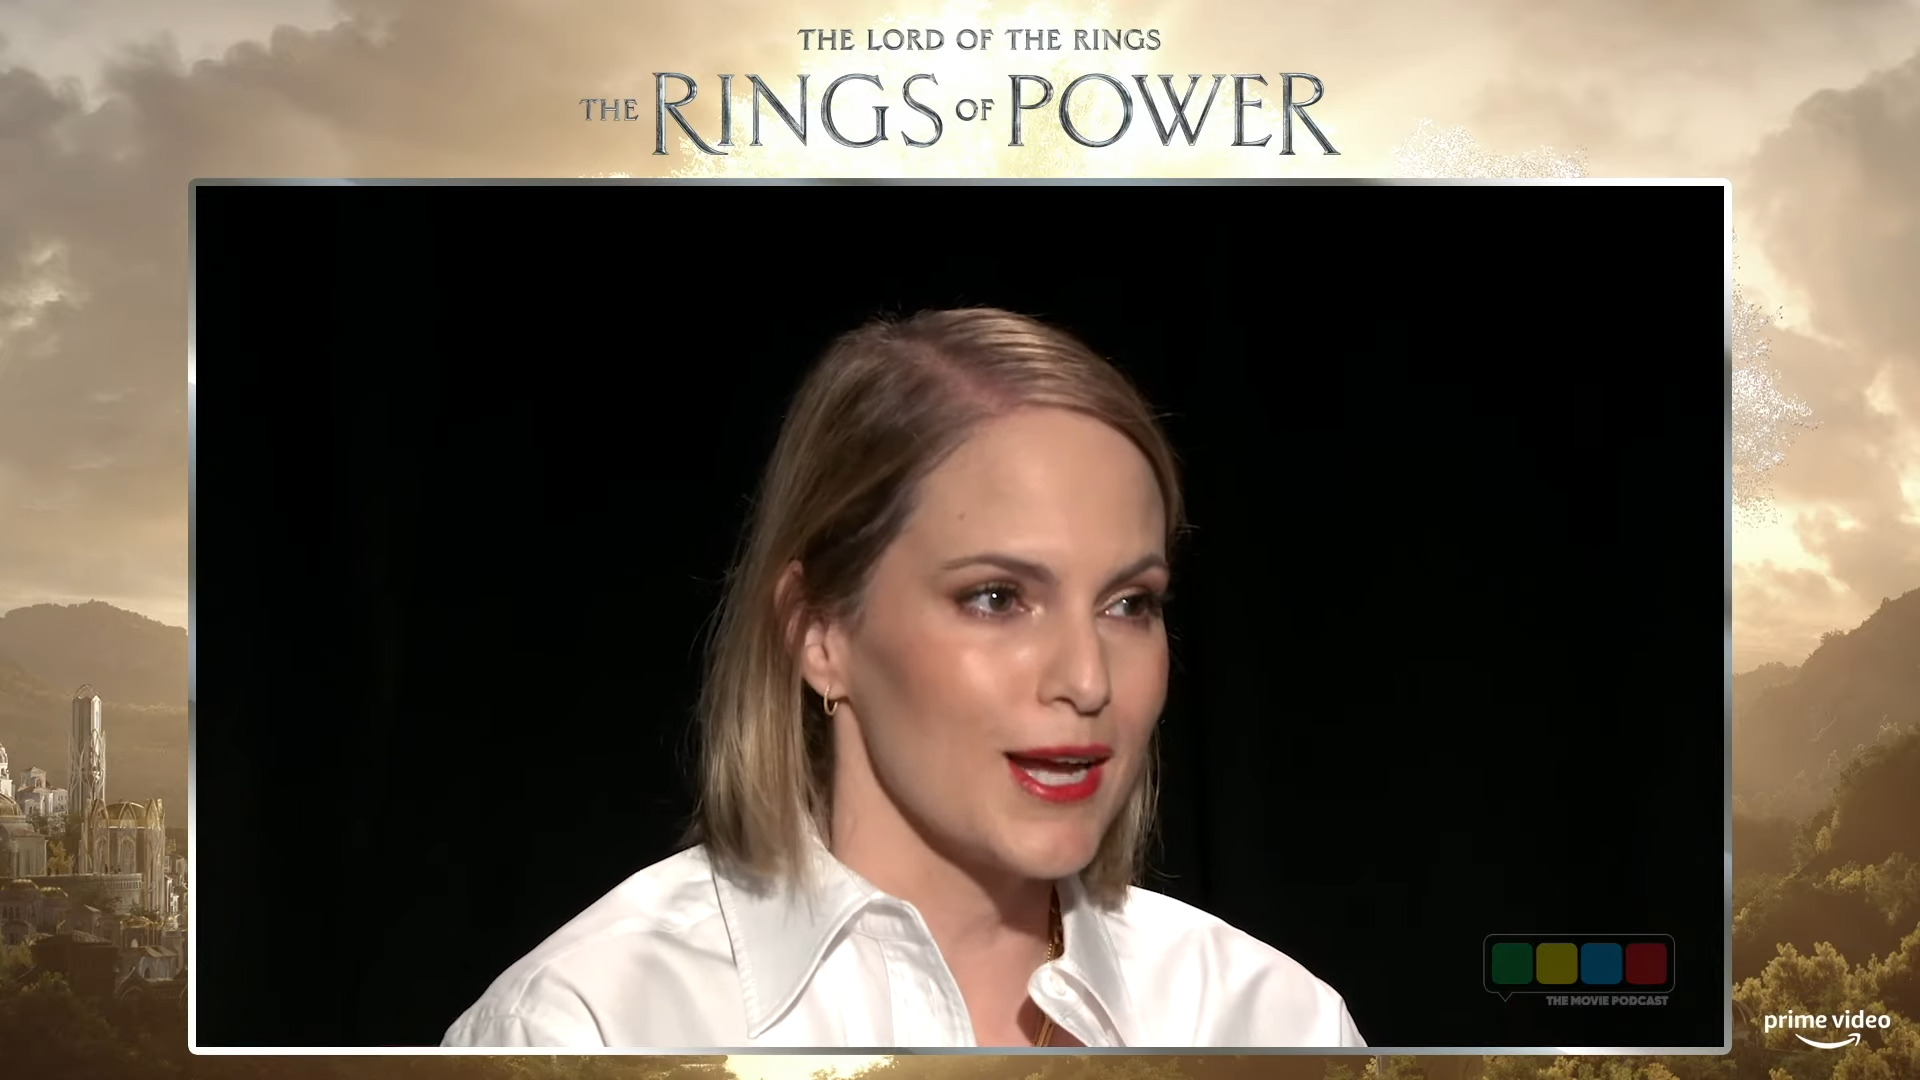 Lindsey Weber speaks with The Movie Podcast about producing Amazon's The Lord of the Rings: The Rings of Power